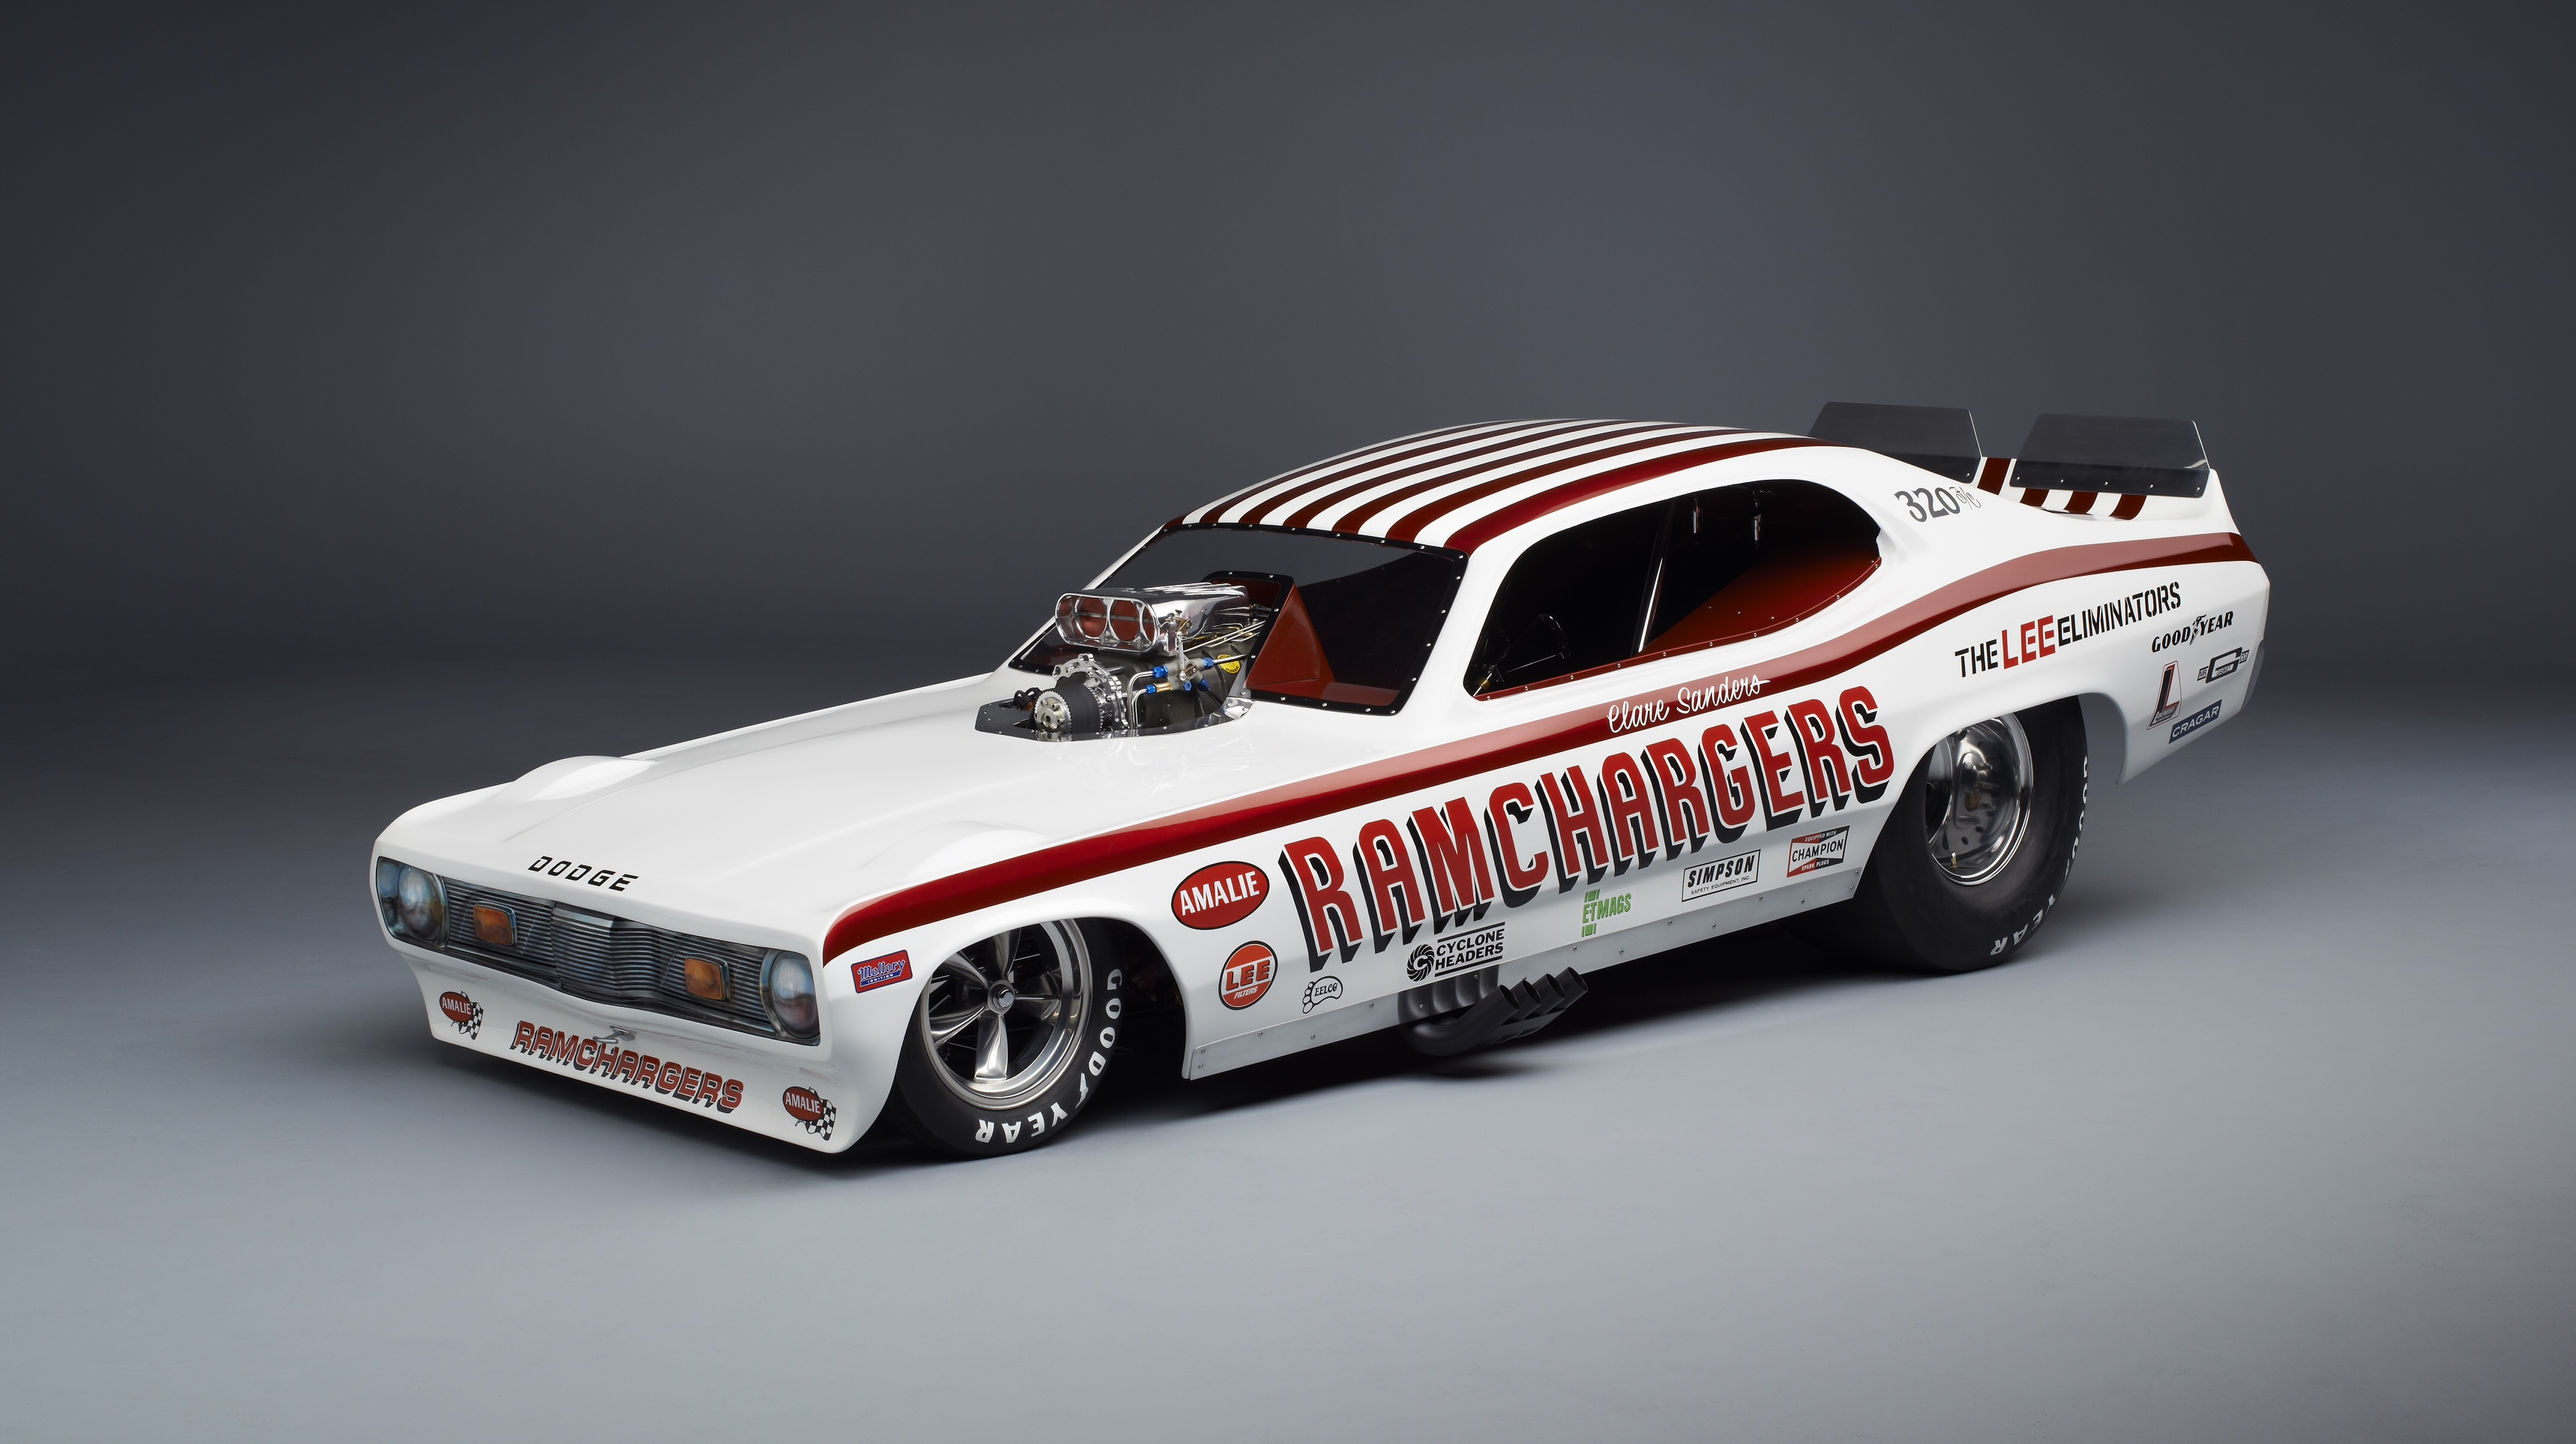 3436x1926 nhra, Drag, Racing, Race, Funny car, Funny, Hot, Rod, Rods, 1972, Dodge, Demon Wallpapers HD / Desktop and Mobile Backgrounds